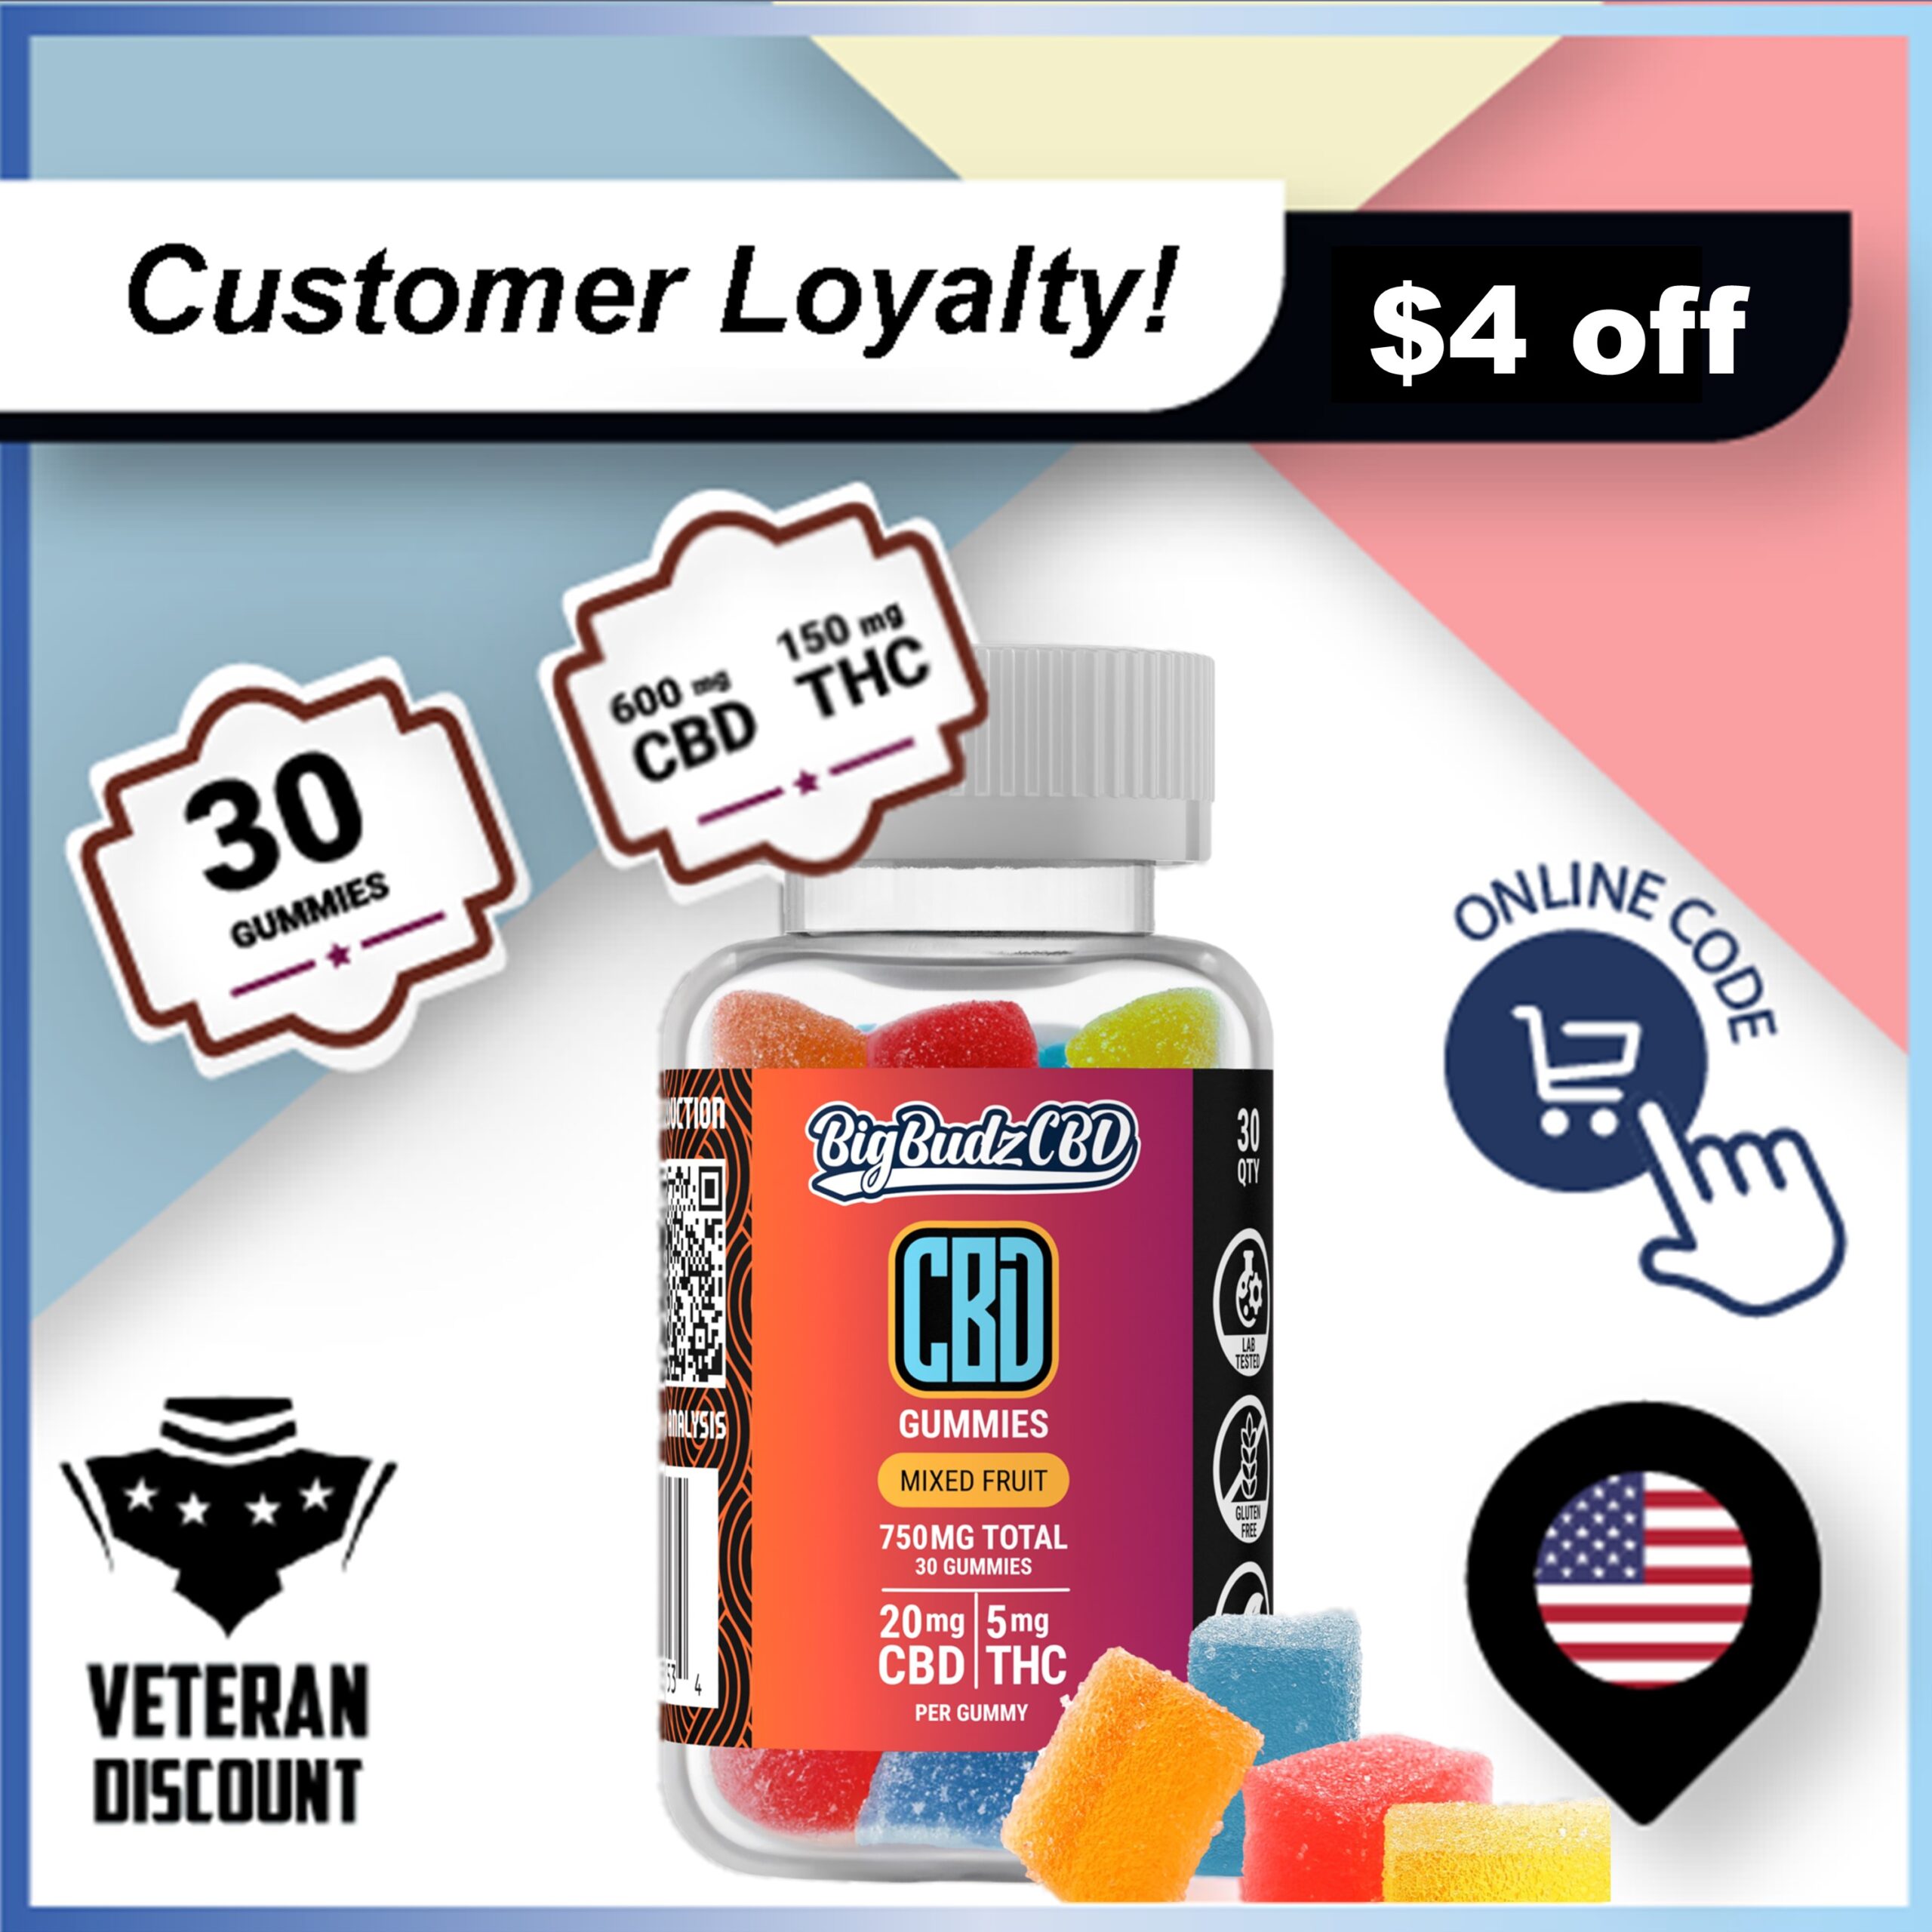 (customer loyalty coupon) 30 count FSO gummies $4 off